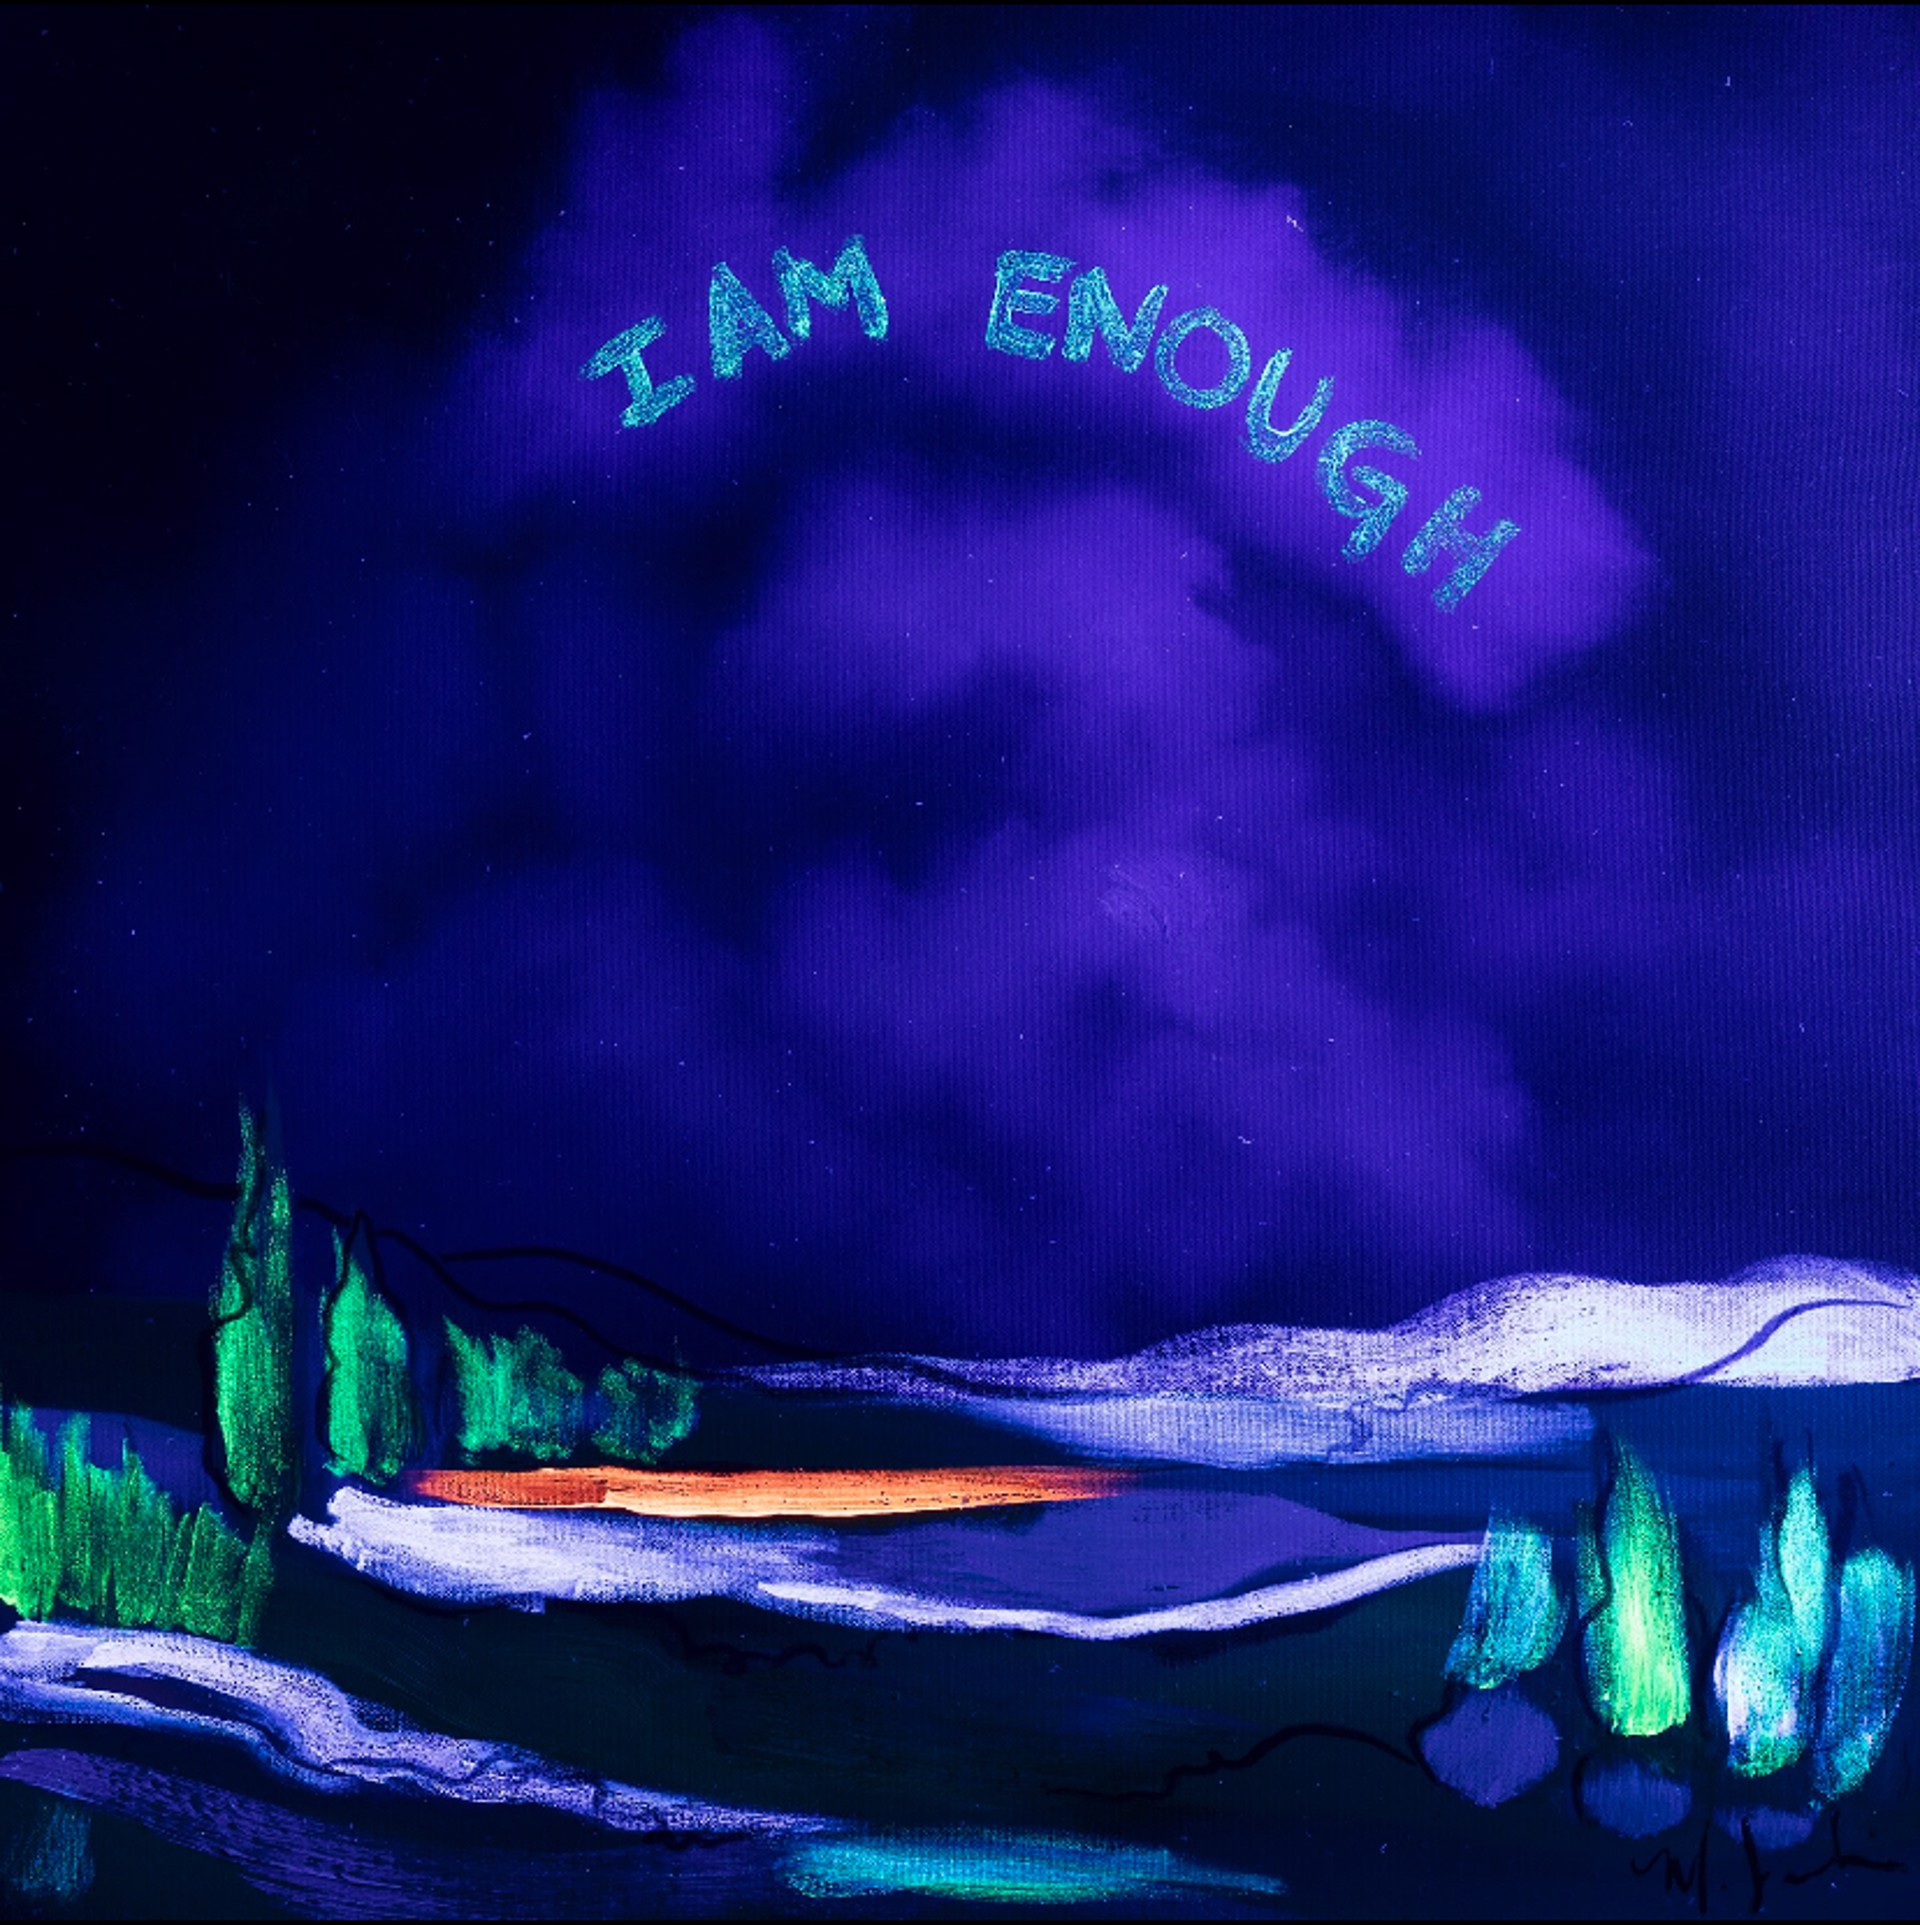 Enough by Michelle Jardines